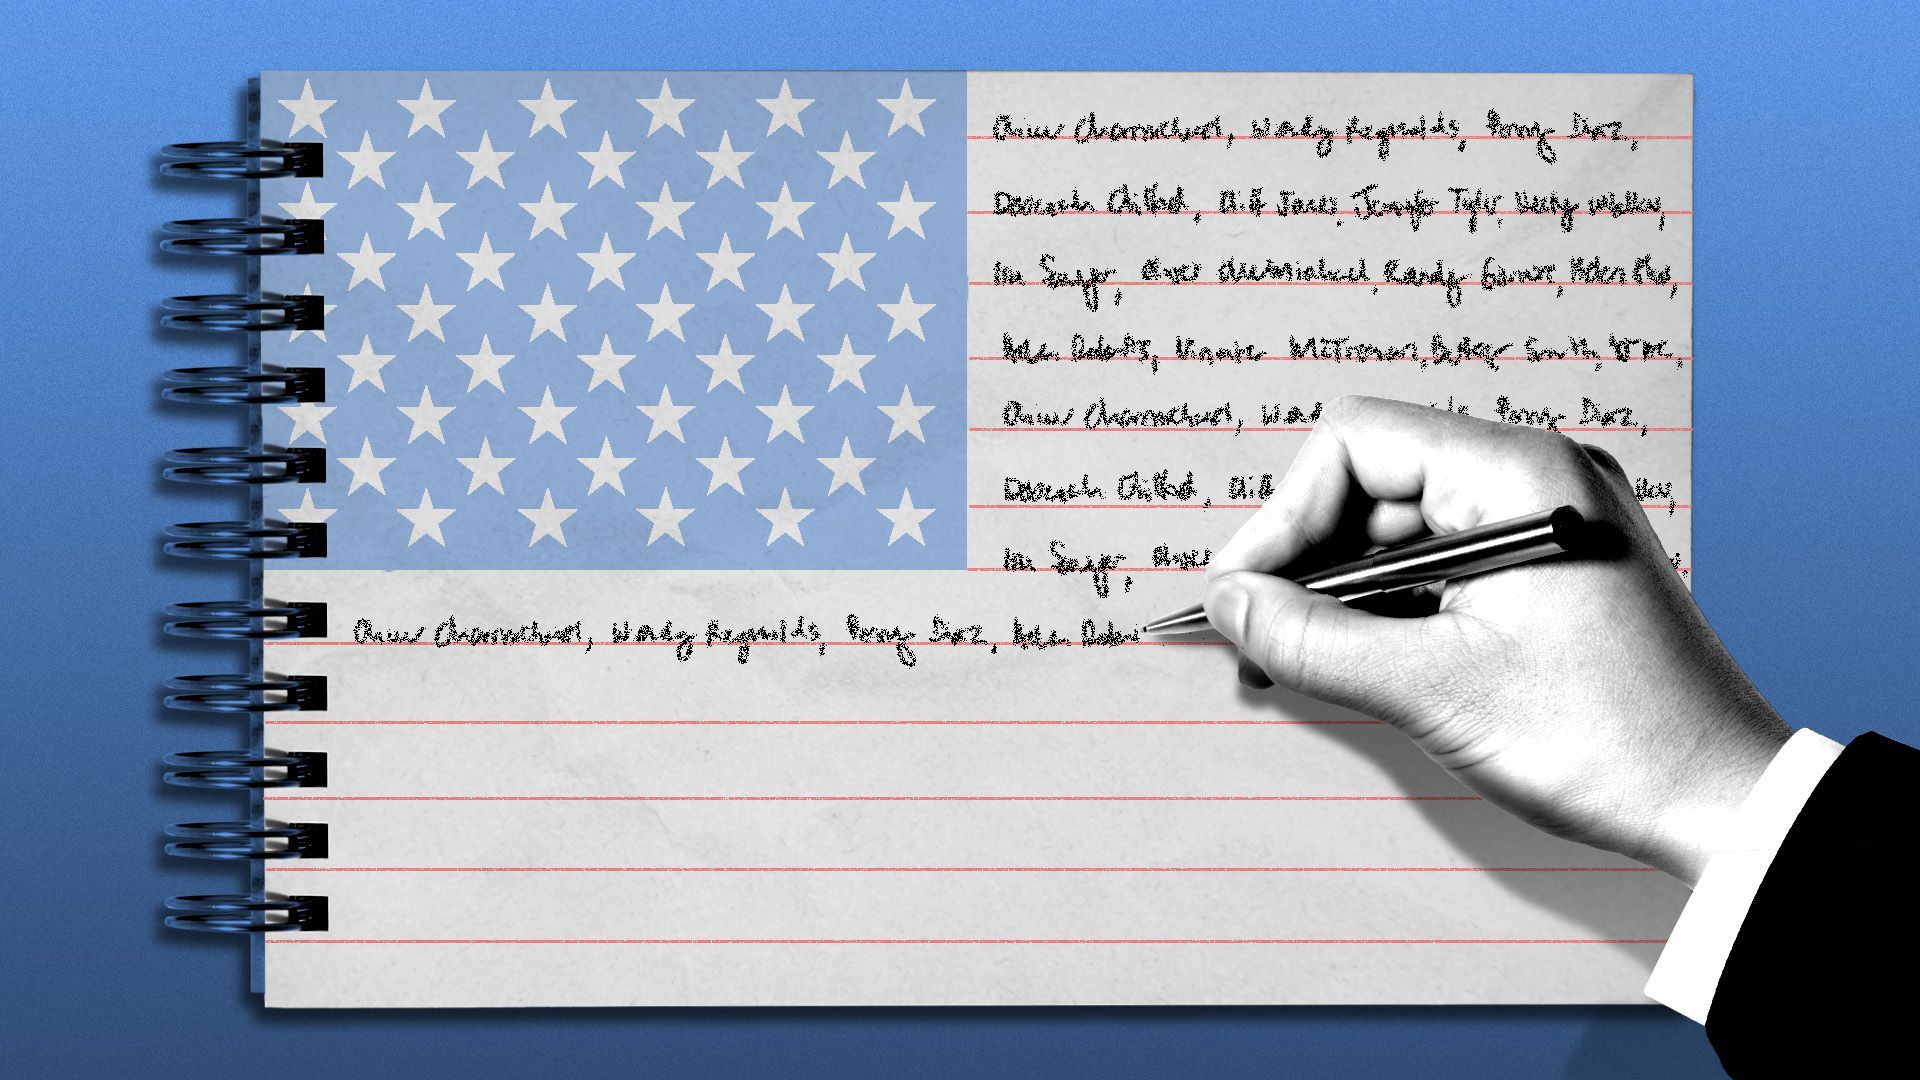 Illustration of a United States flag-shaped spiral notebook with a hand writing names in it